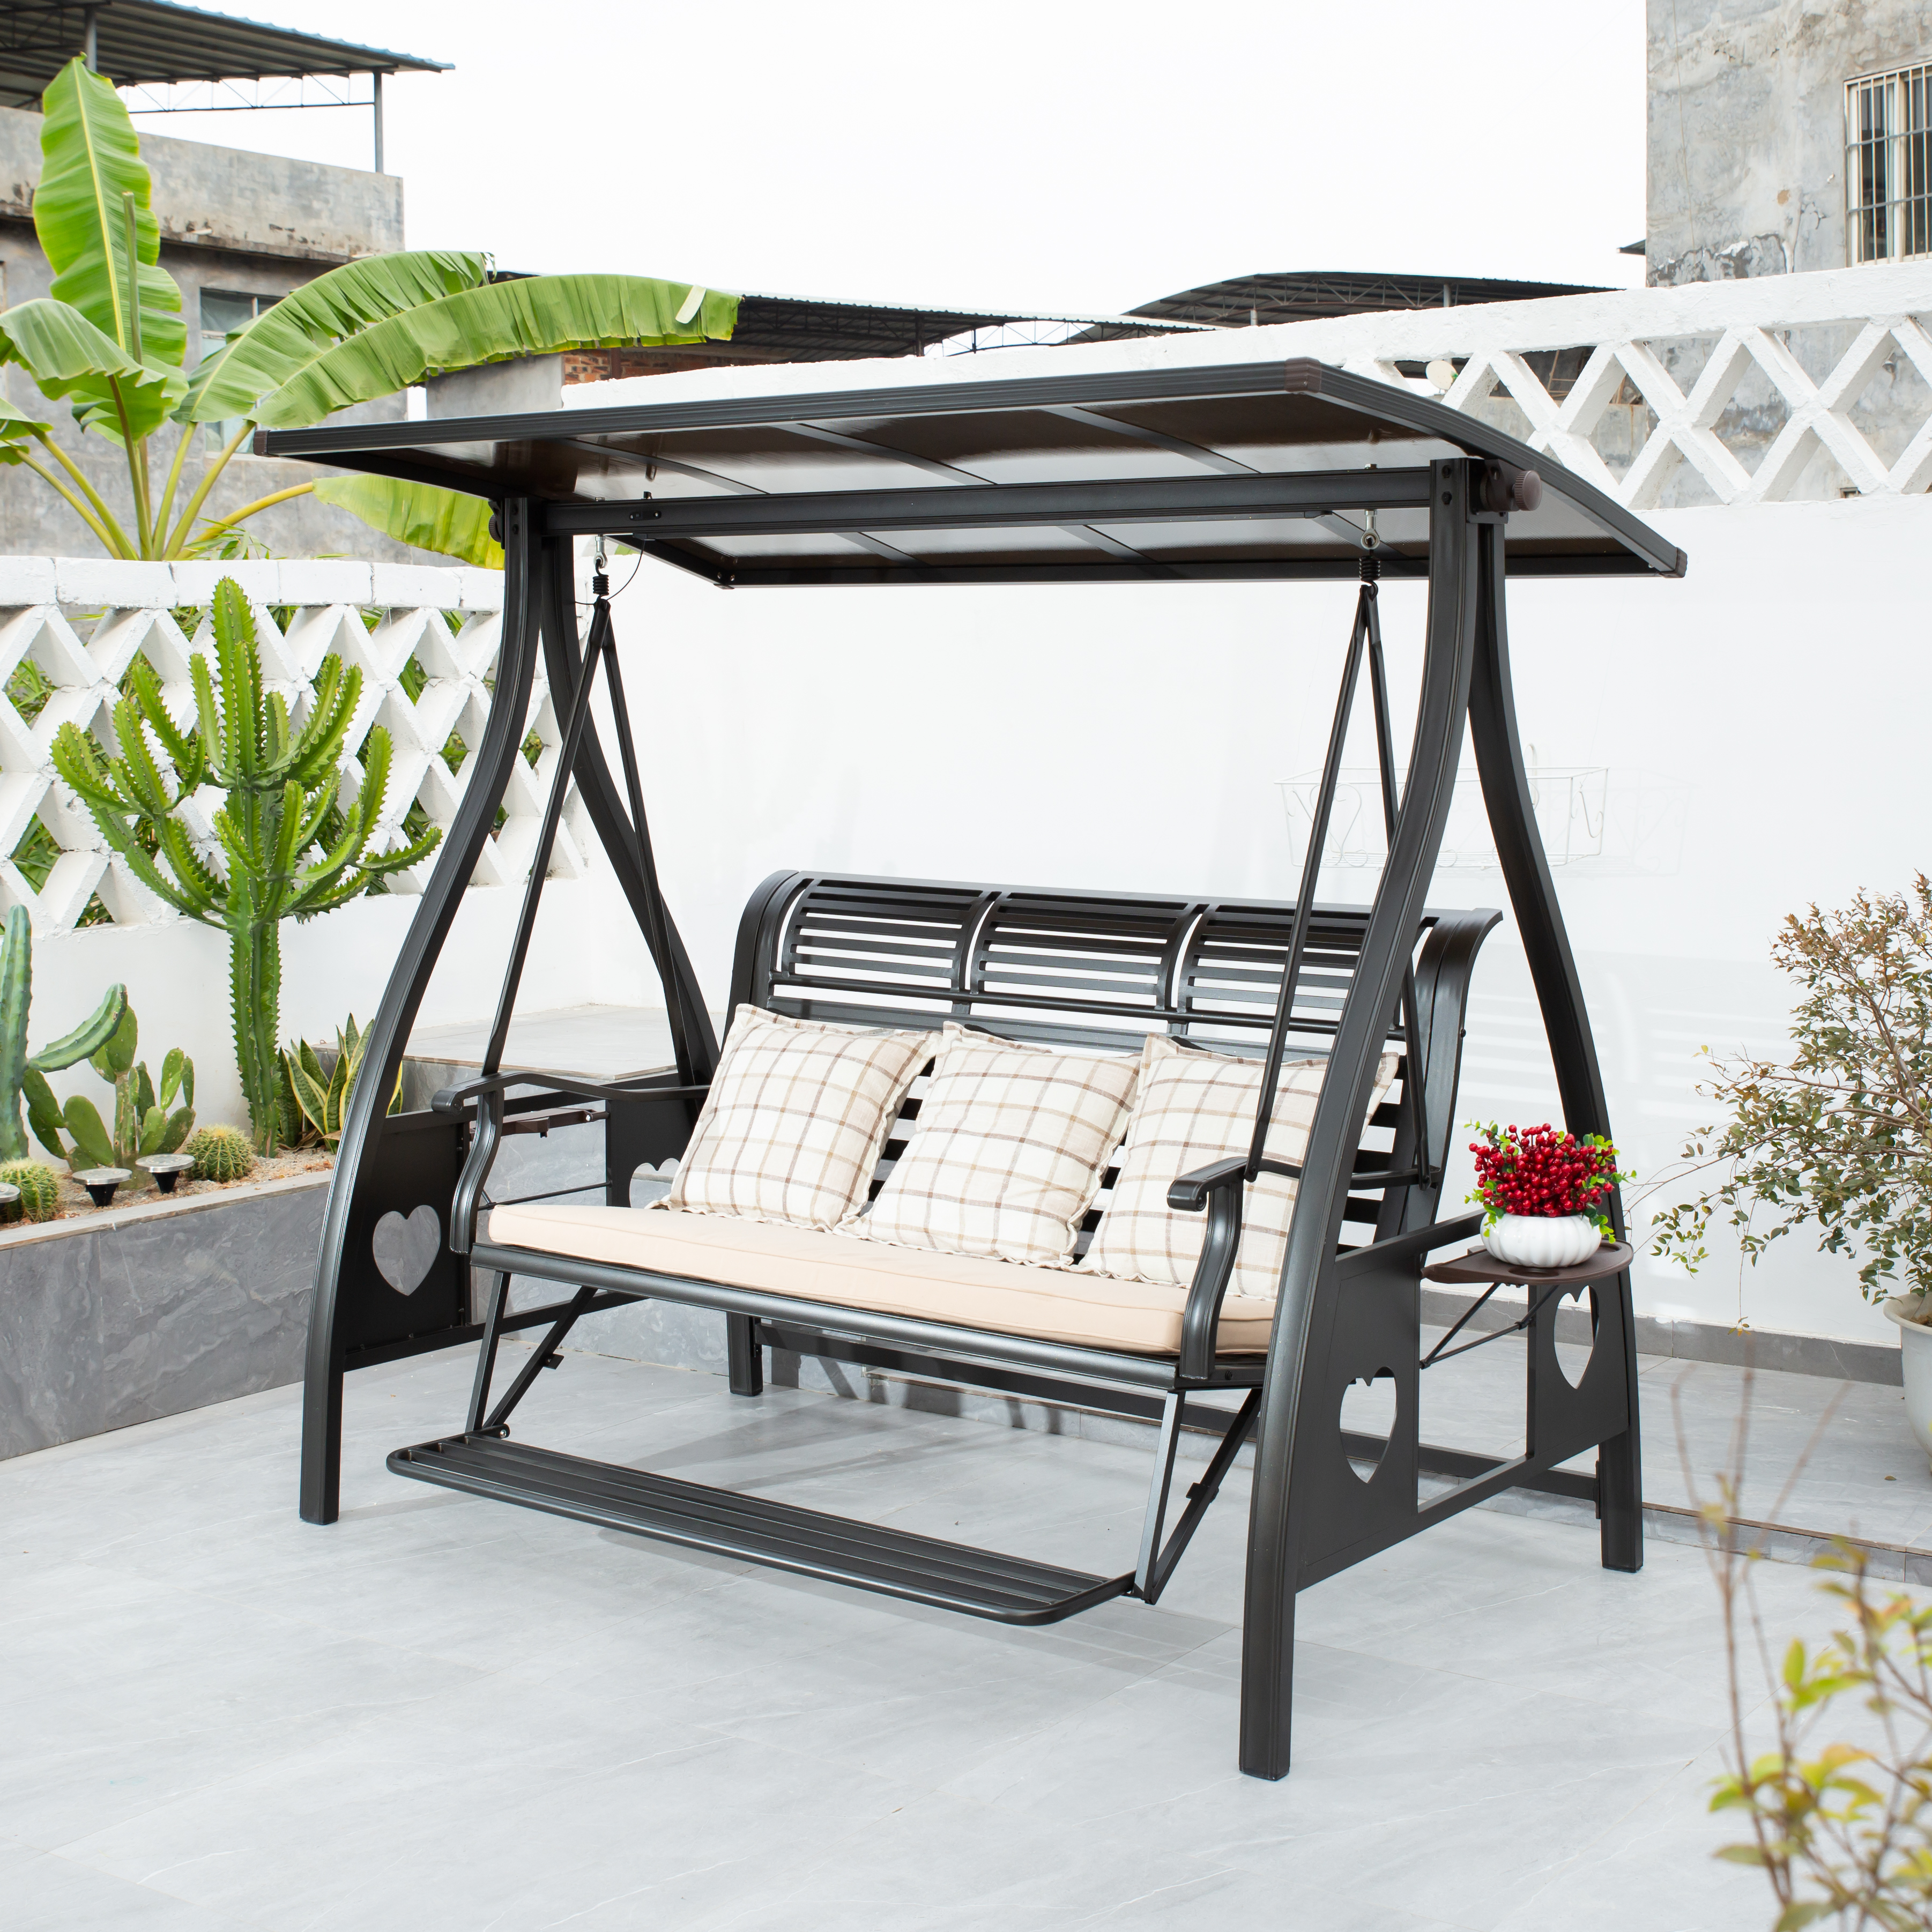 Three Seat Aluminum Swing Chair with Canopy 